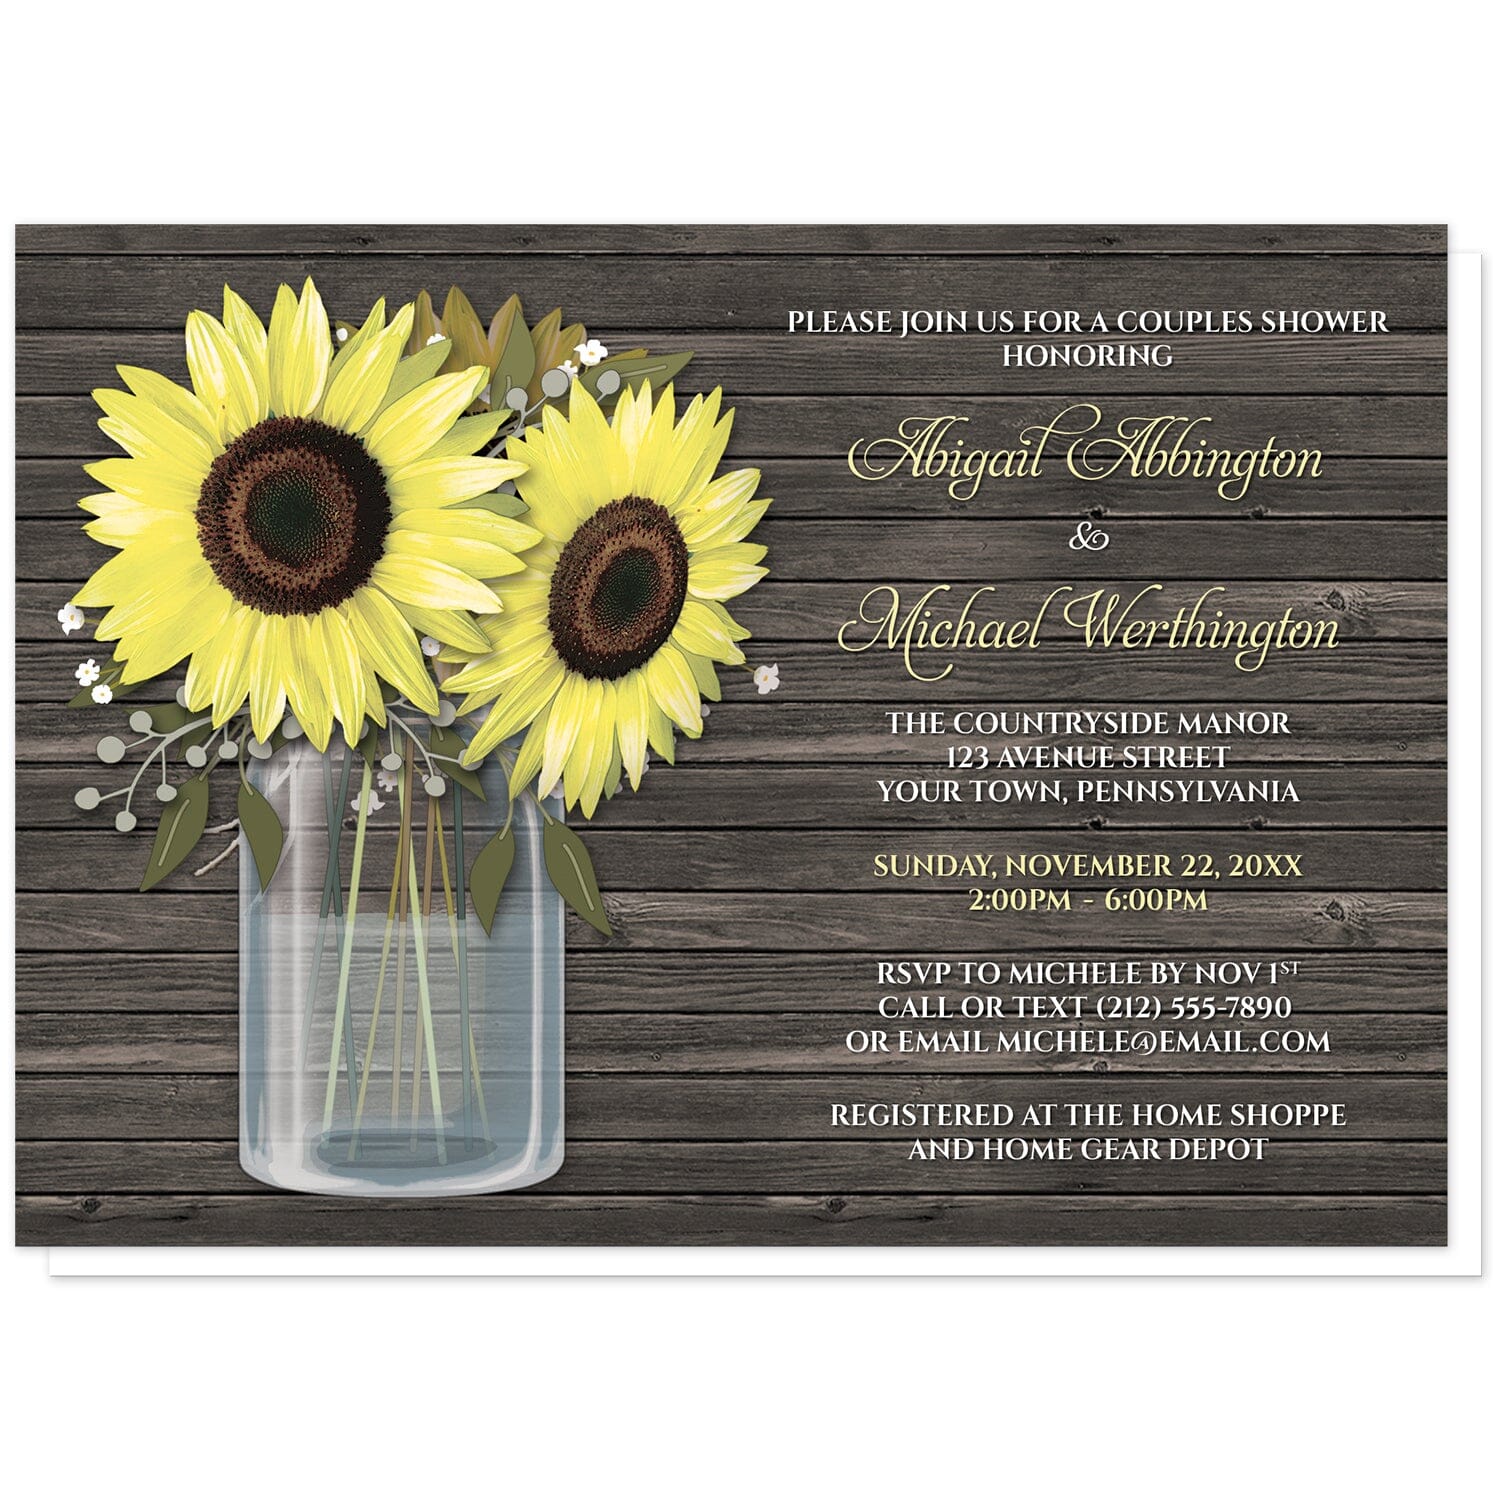 Rustic Sunflower Wood Mason Jar Couples Shower Invitations at Artistically Invited. Southern country-inspired rustic sunflower wood mason jar couples shower invitations with big yellow sunflowers, small accents of baby's breath, and green leaves in a glass mason jar illustration. Your personalized couples shower celebration details are custom printed in yellow and white to the right of the sunflowers and mason jar design over a dark brown wood background.